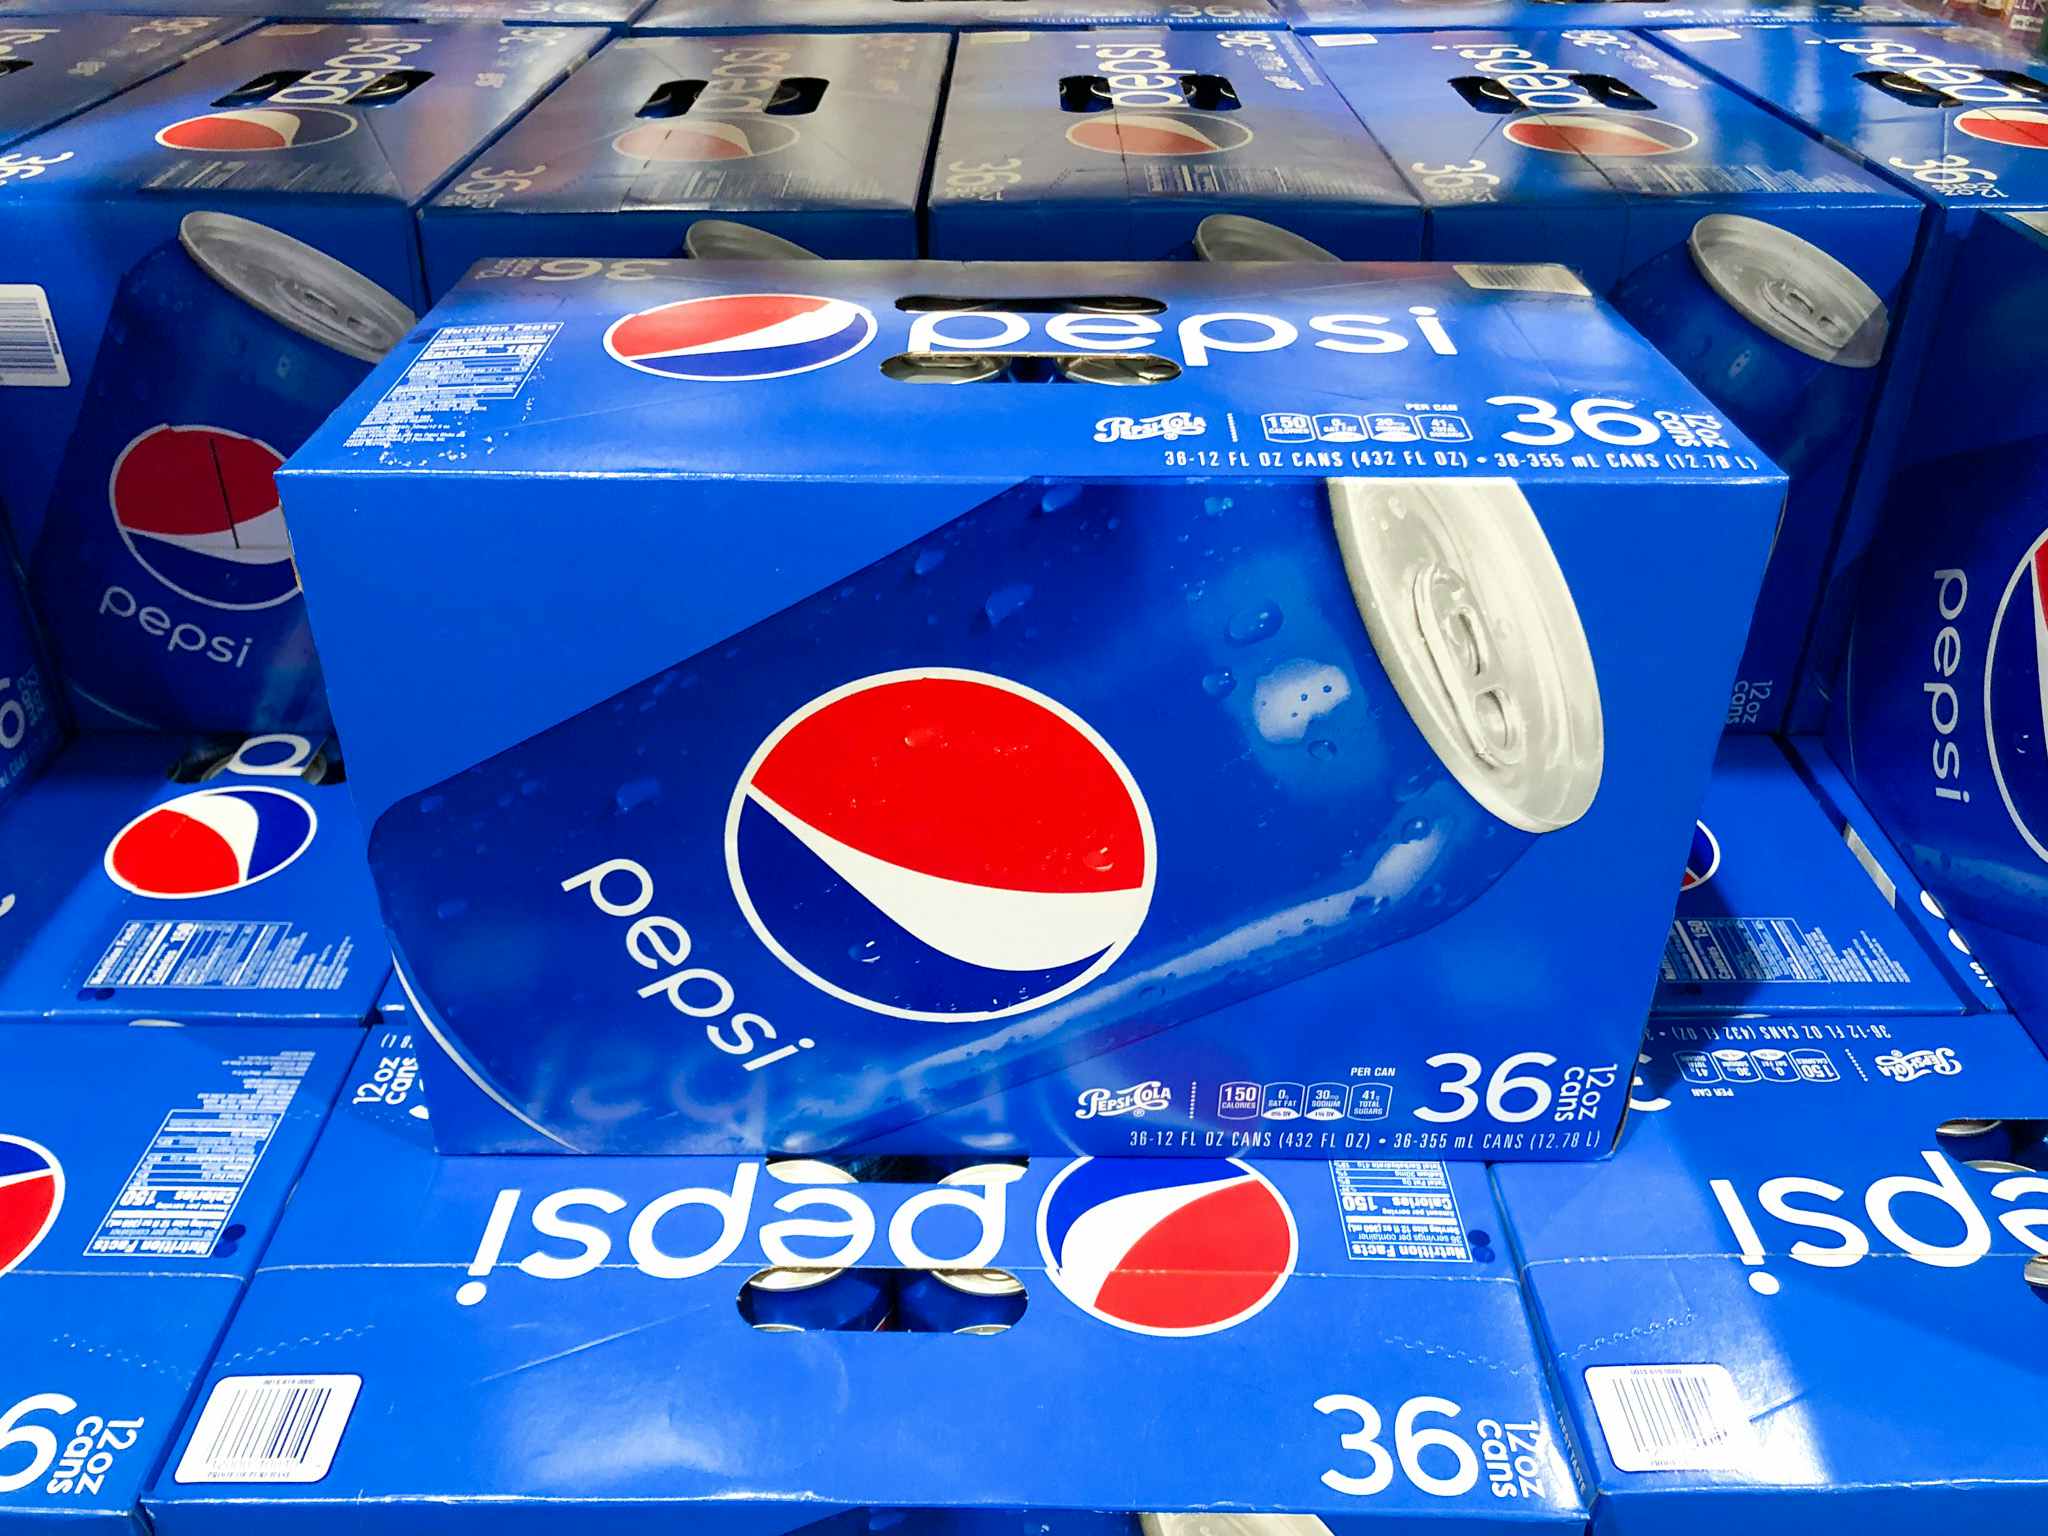 a box of pespi stacked on other boxes of pepsi